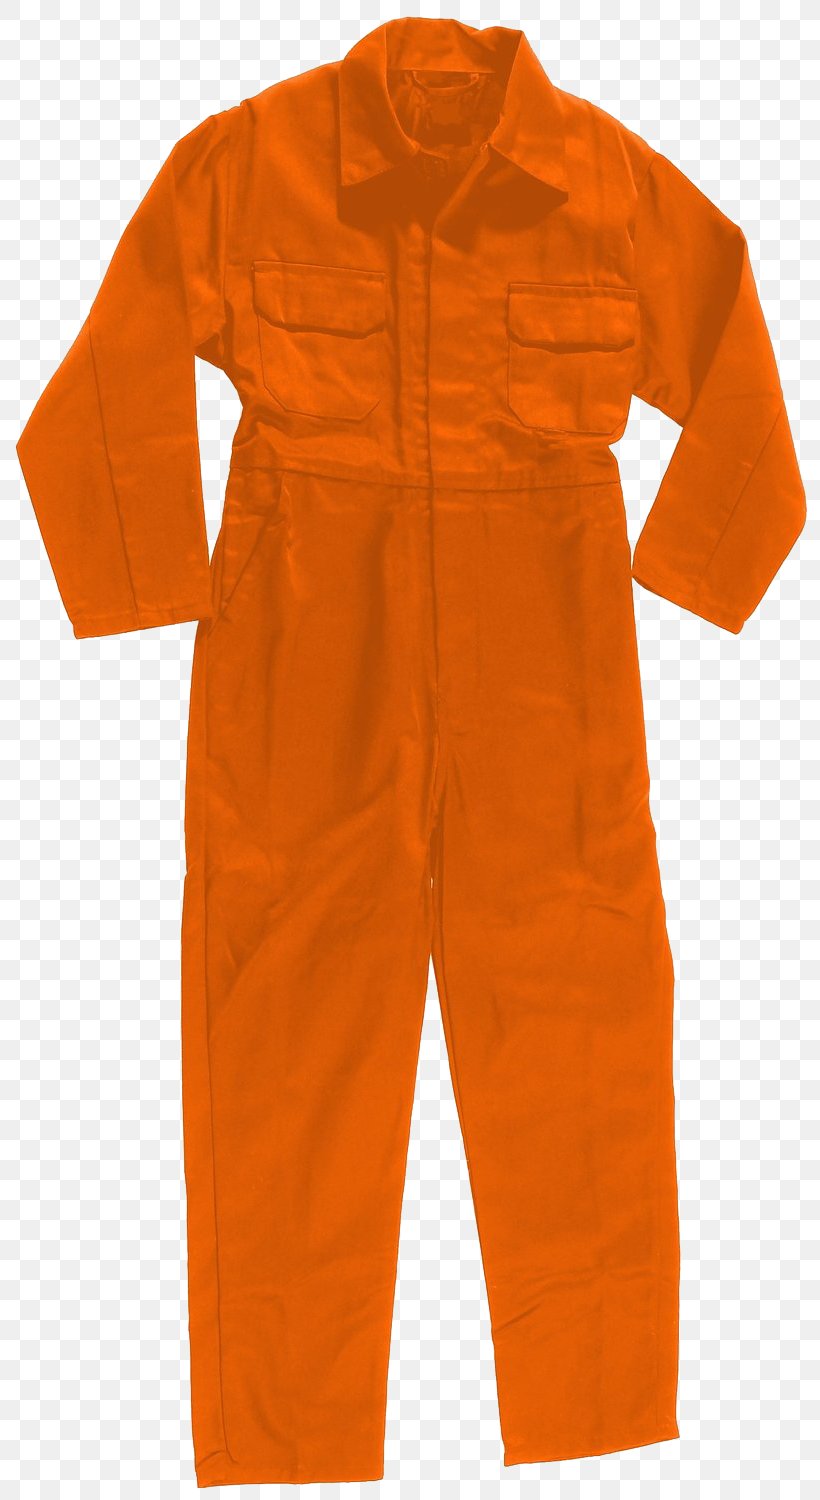 Outerwear Sleeve, PNG, 800x1500px, Outerwear, Orange, Overall, Sleeve Download Free